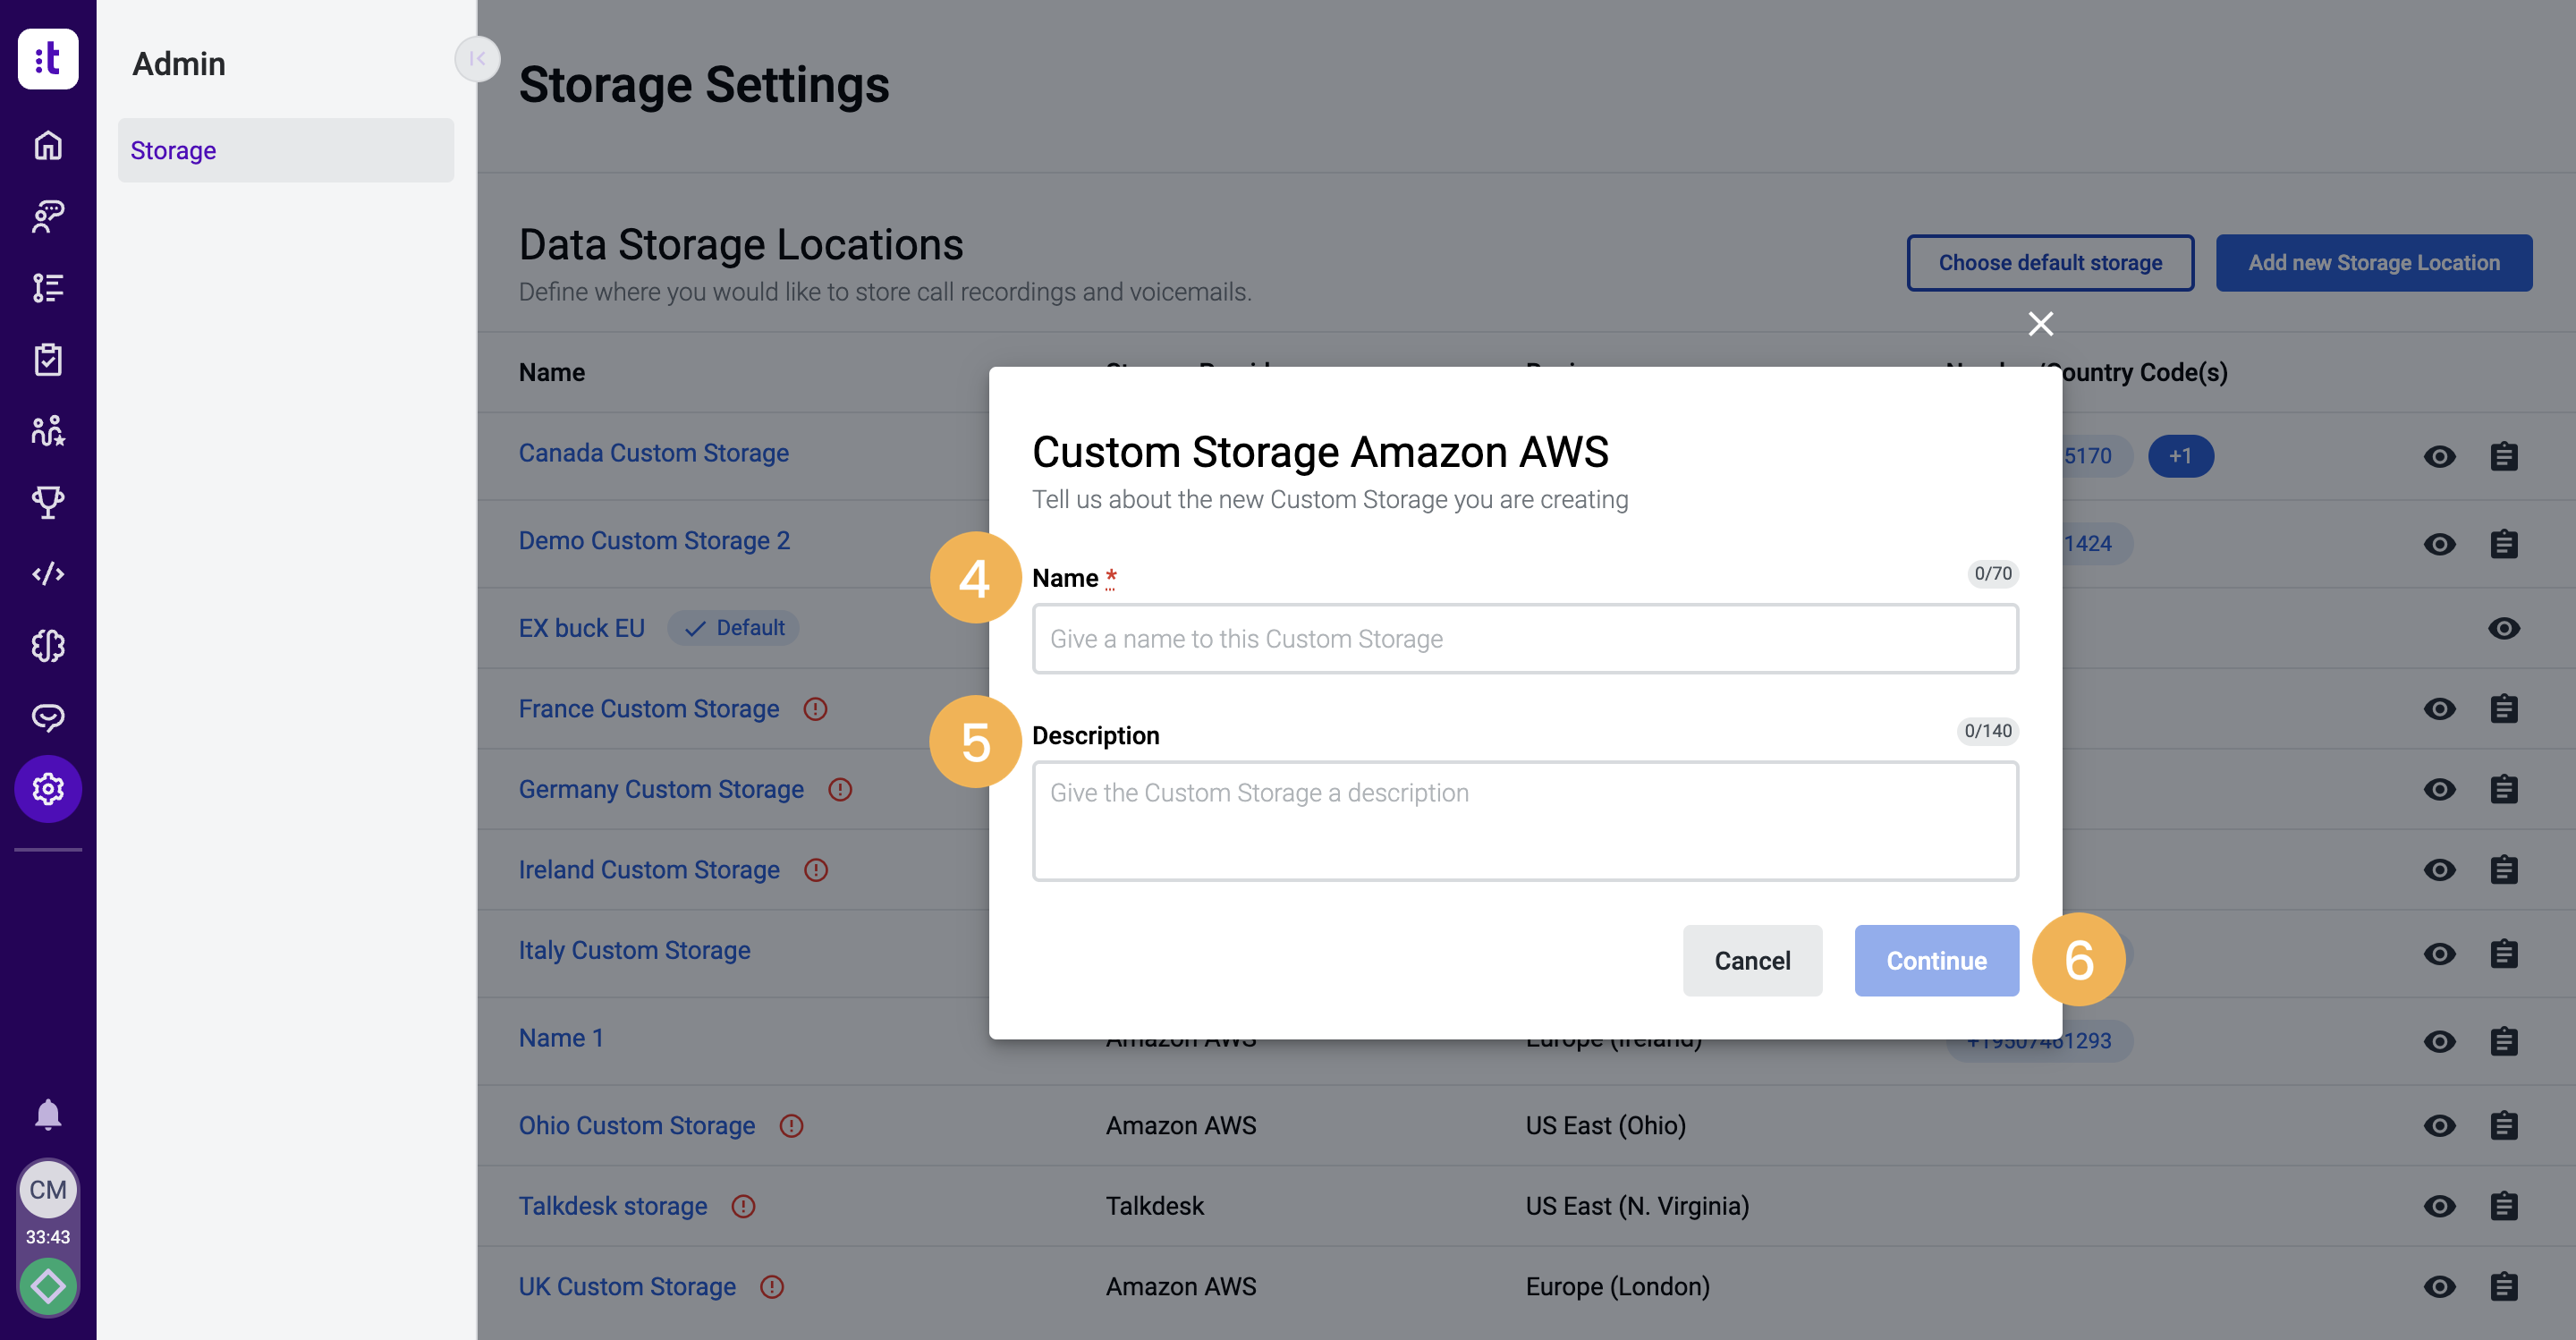 Name__for_the_custom_storage__and_you_can_add_a__Description__4-6..png